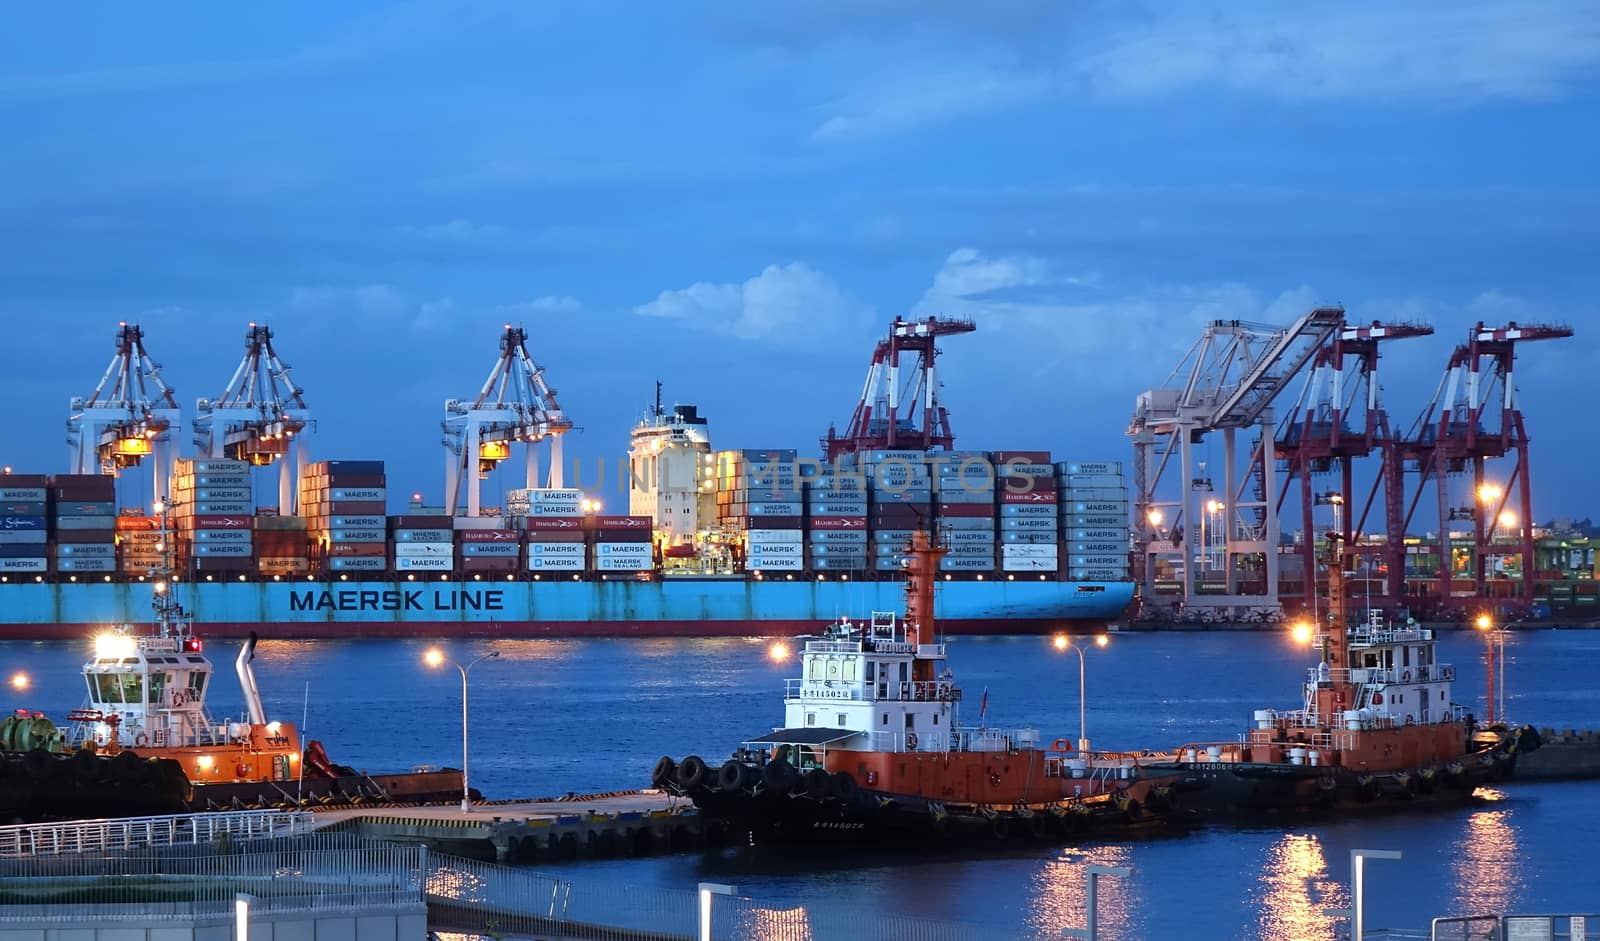 Kaohsiung Container Port after Dusk by shiyali